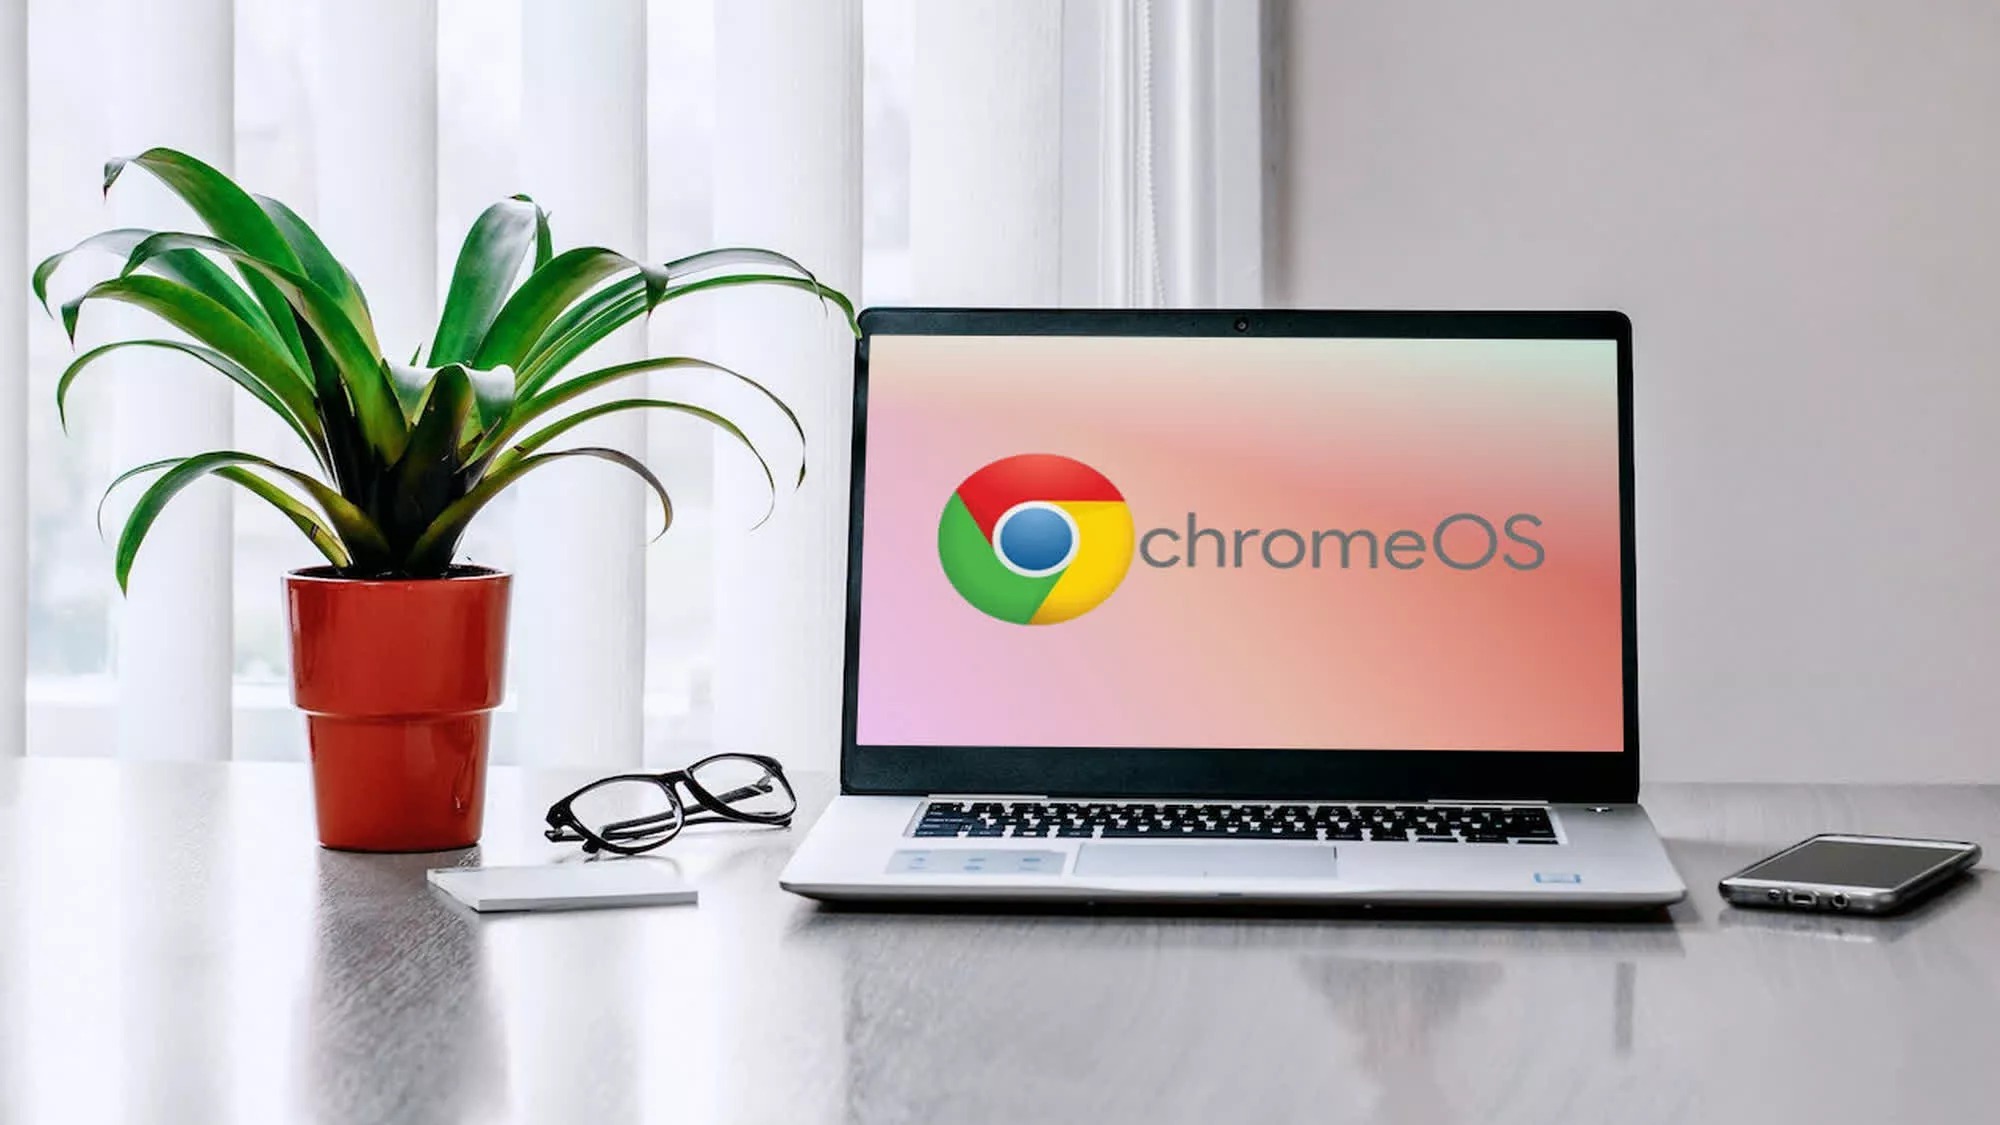 What Is The Google Chrome OS?